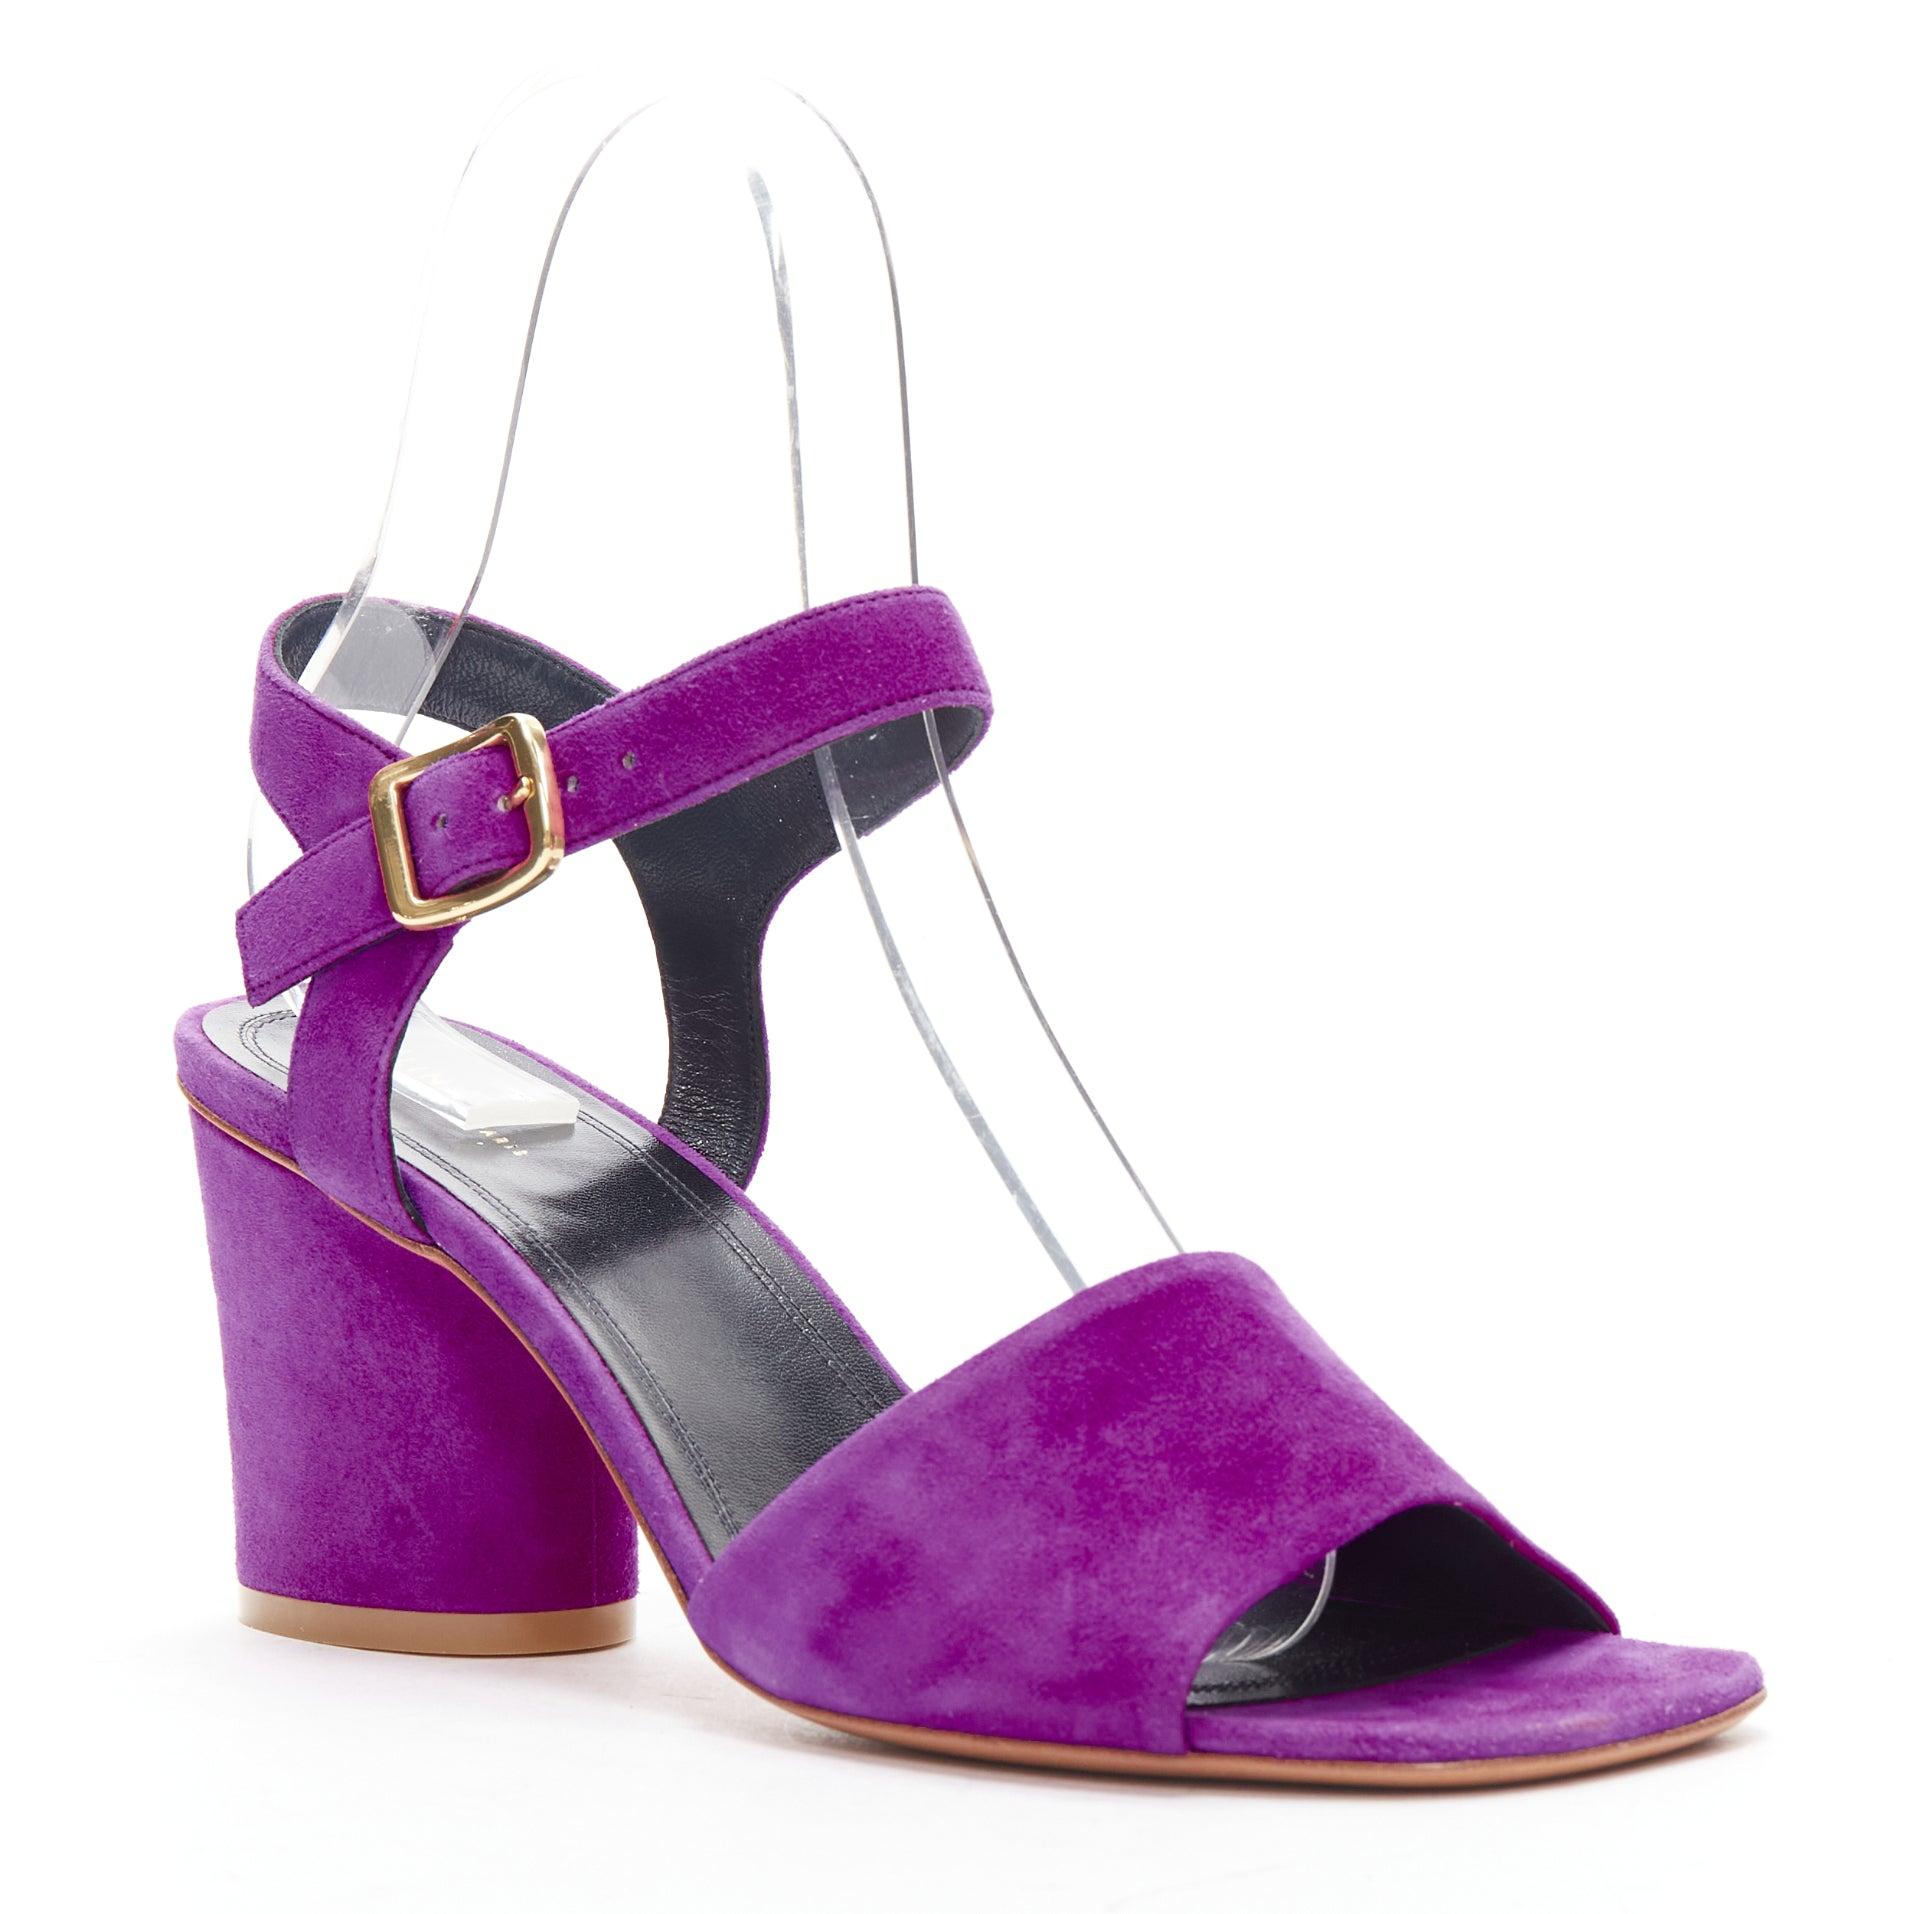 OLD CELINE Phoebe Philo purple suede gold buckle strappy sandal heels EU38
Reference: BSHW/A00158
Brand: Celine
Designer: Phoebe Philo
Material: Suede
Color: Purple, Gold
Pattern: Solid
Closure: Ankle Strap
Lining: Black Leather
Made in: